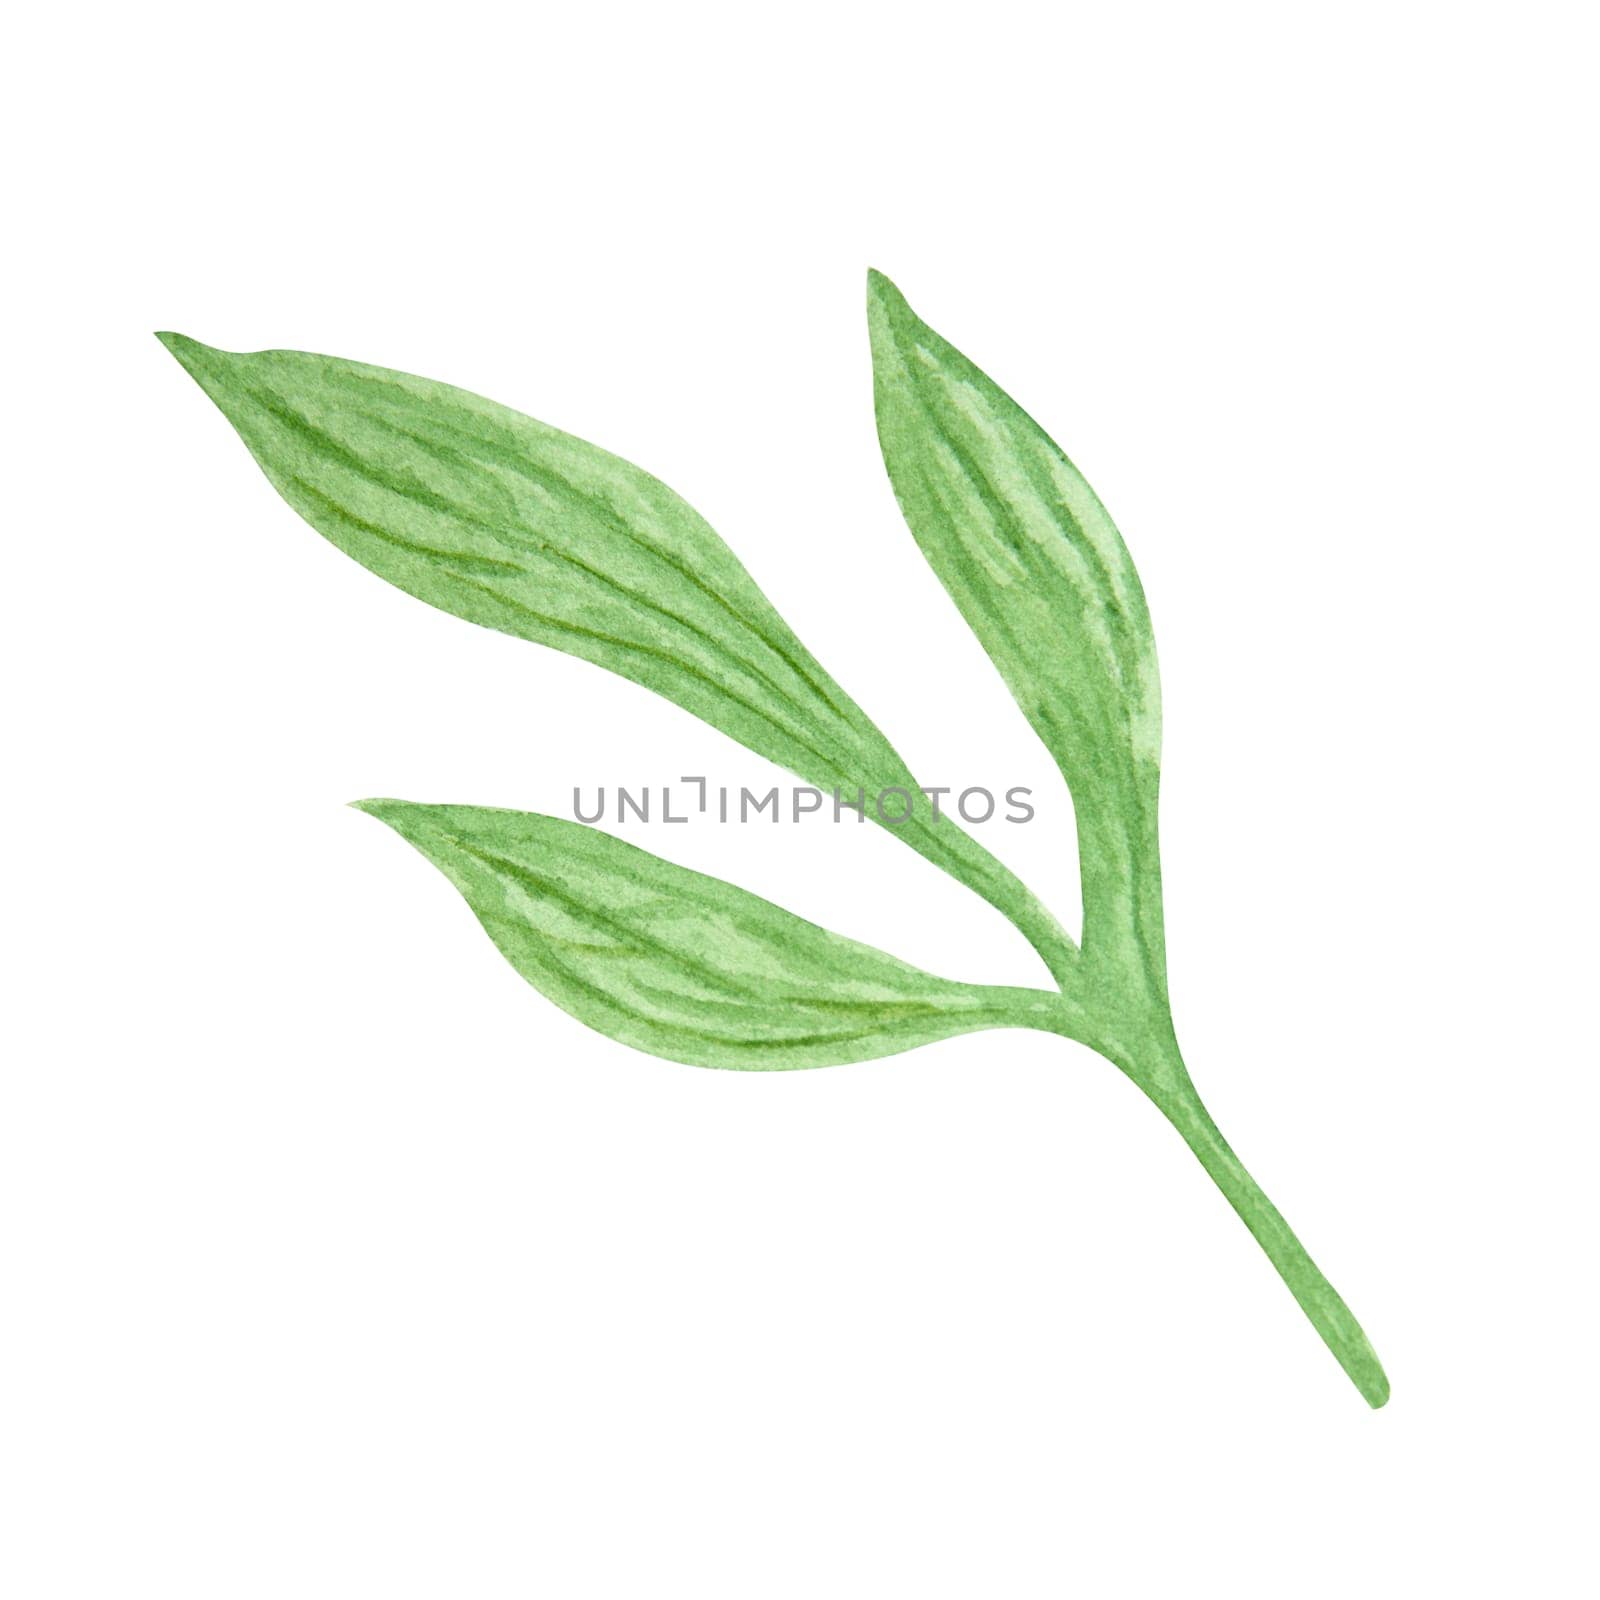 Peony leaves watercolor hand drawn painting. Realistic botanical clipart, floral arrangement. Chinese national symbol illustration. Perfect for card design, wedding invitation, print, textile, packing by florainlove_art